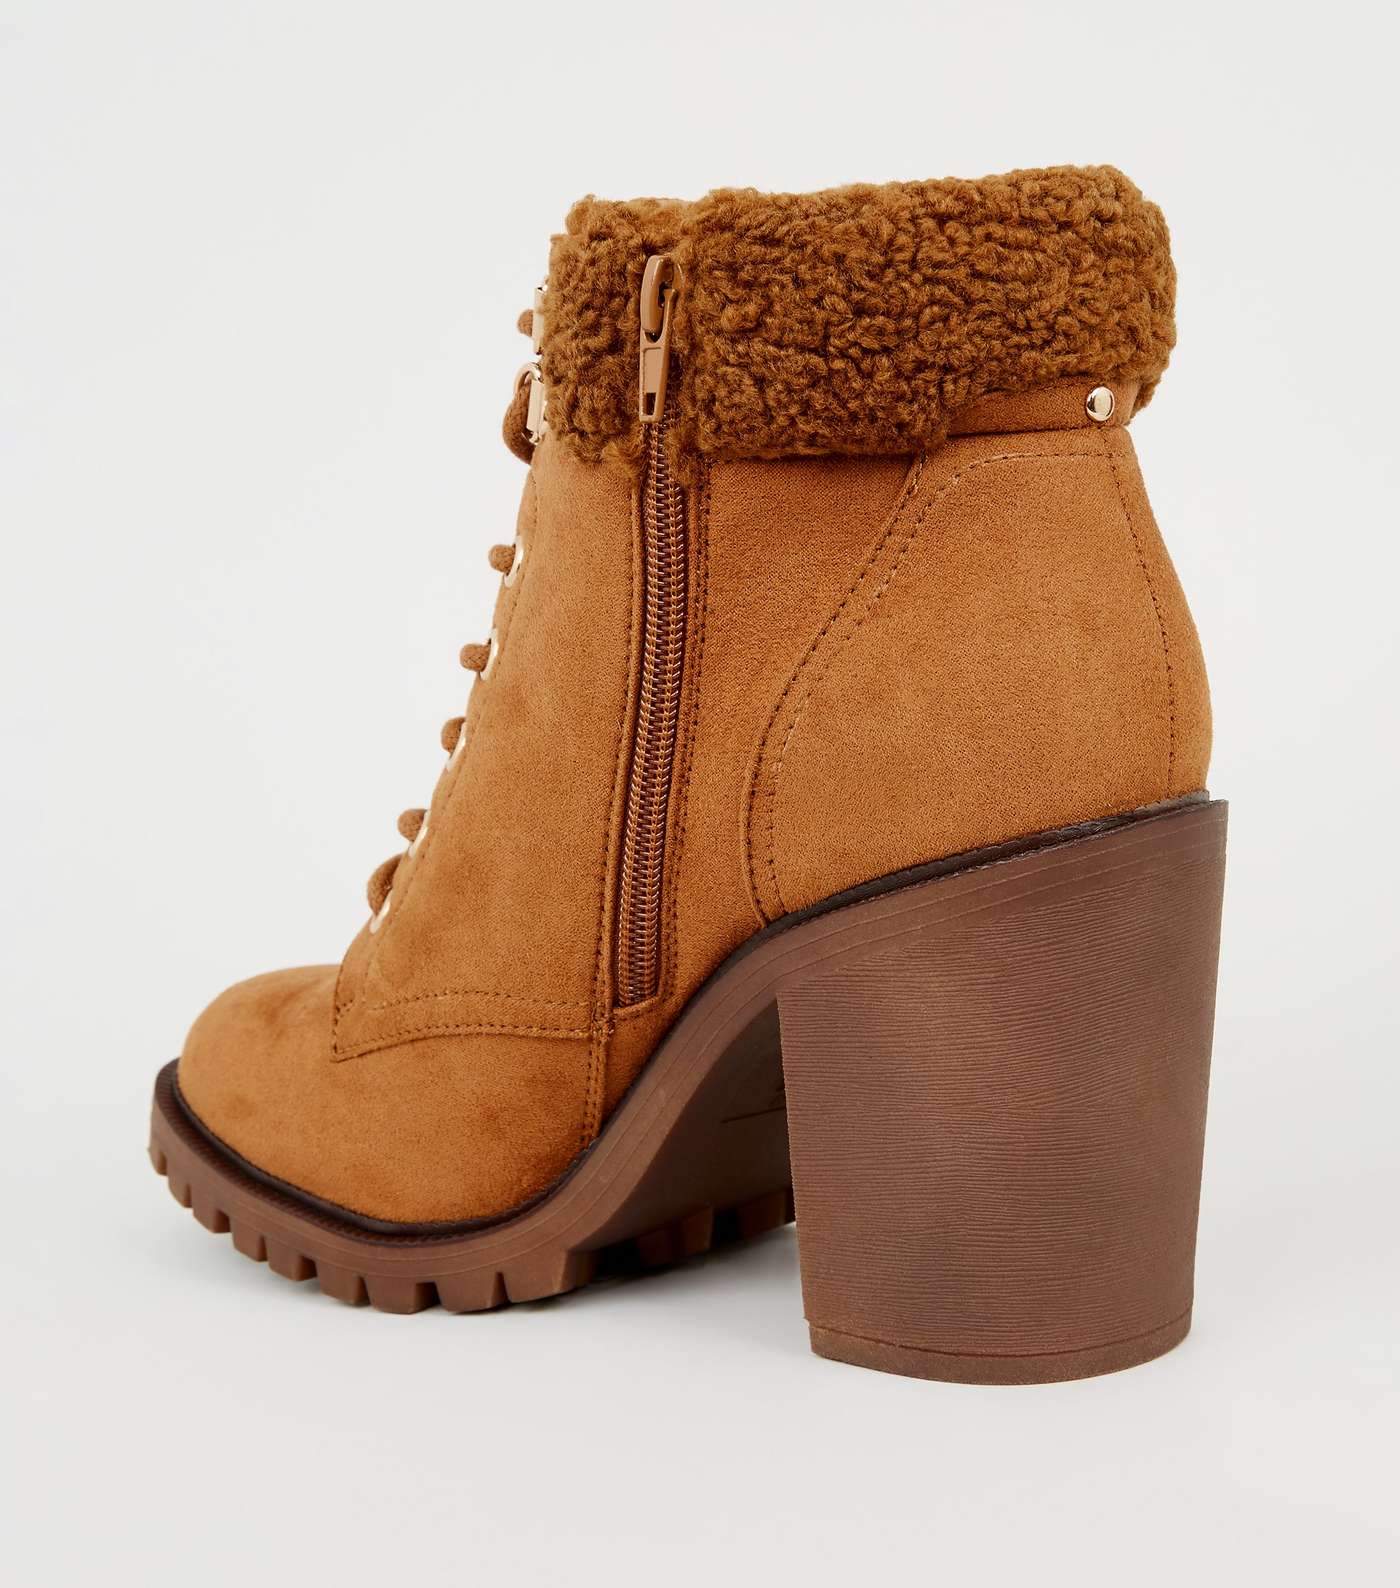 Tan Teddy Trim Block Heel Lace Up Boots Image 4